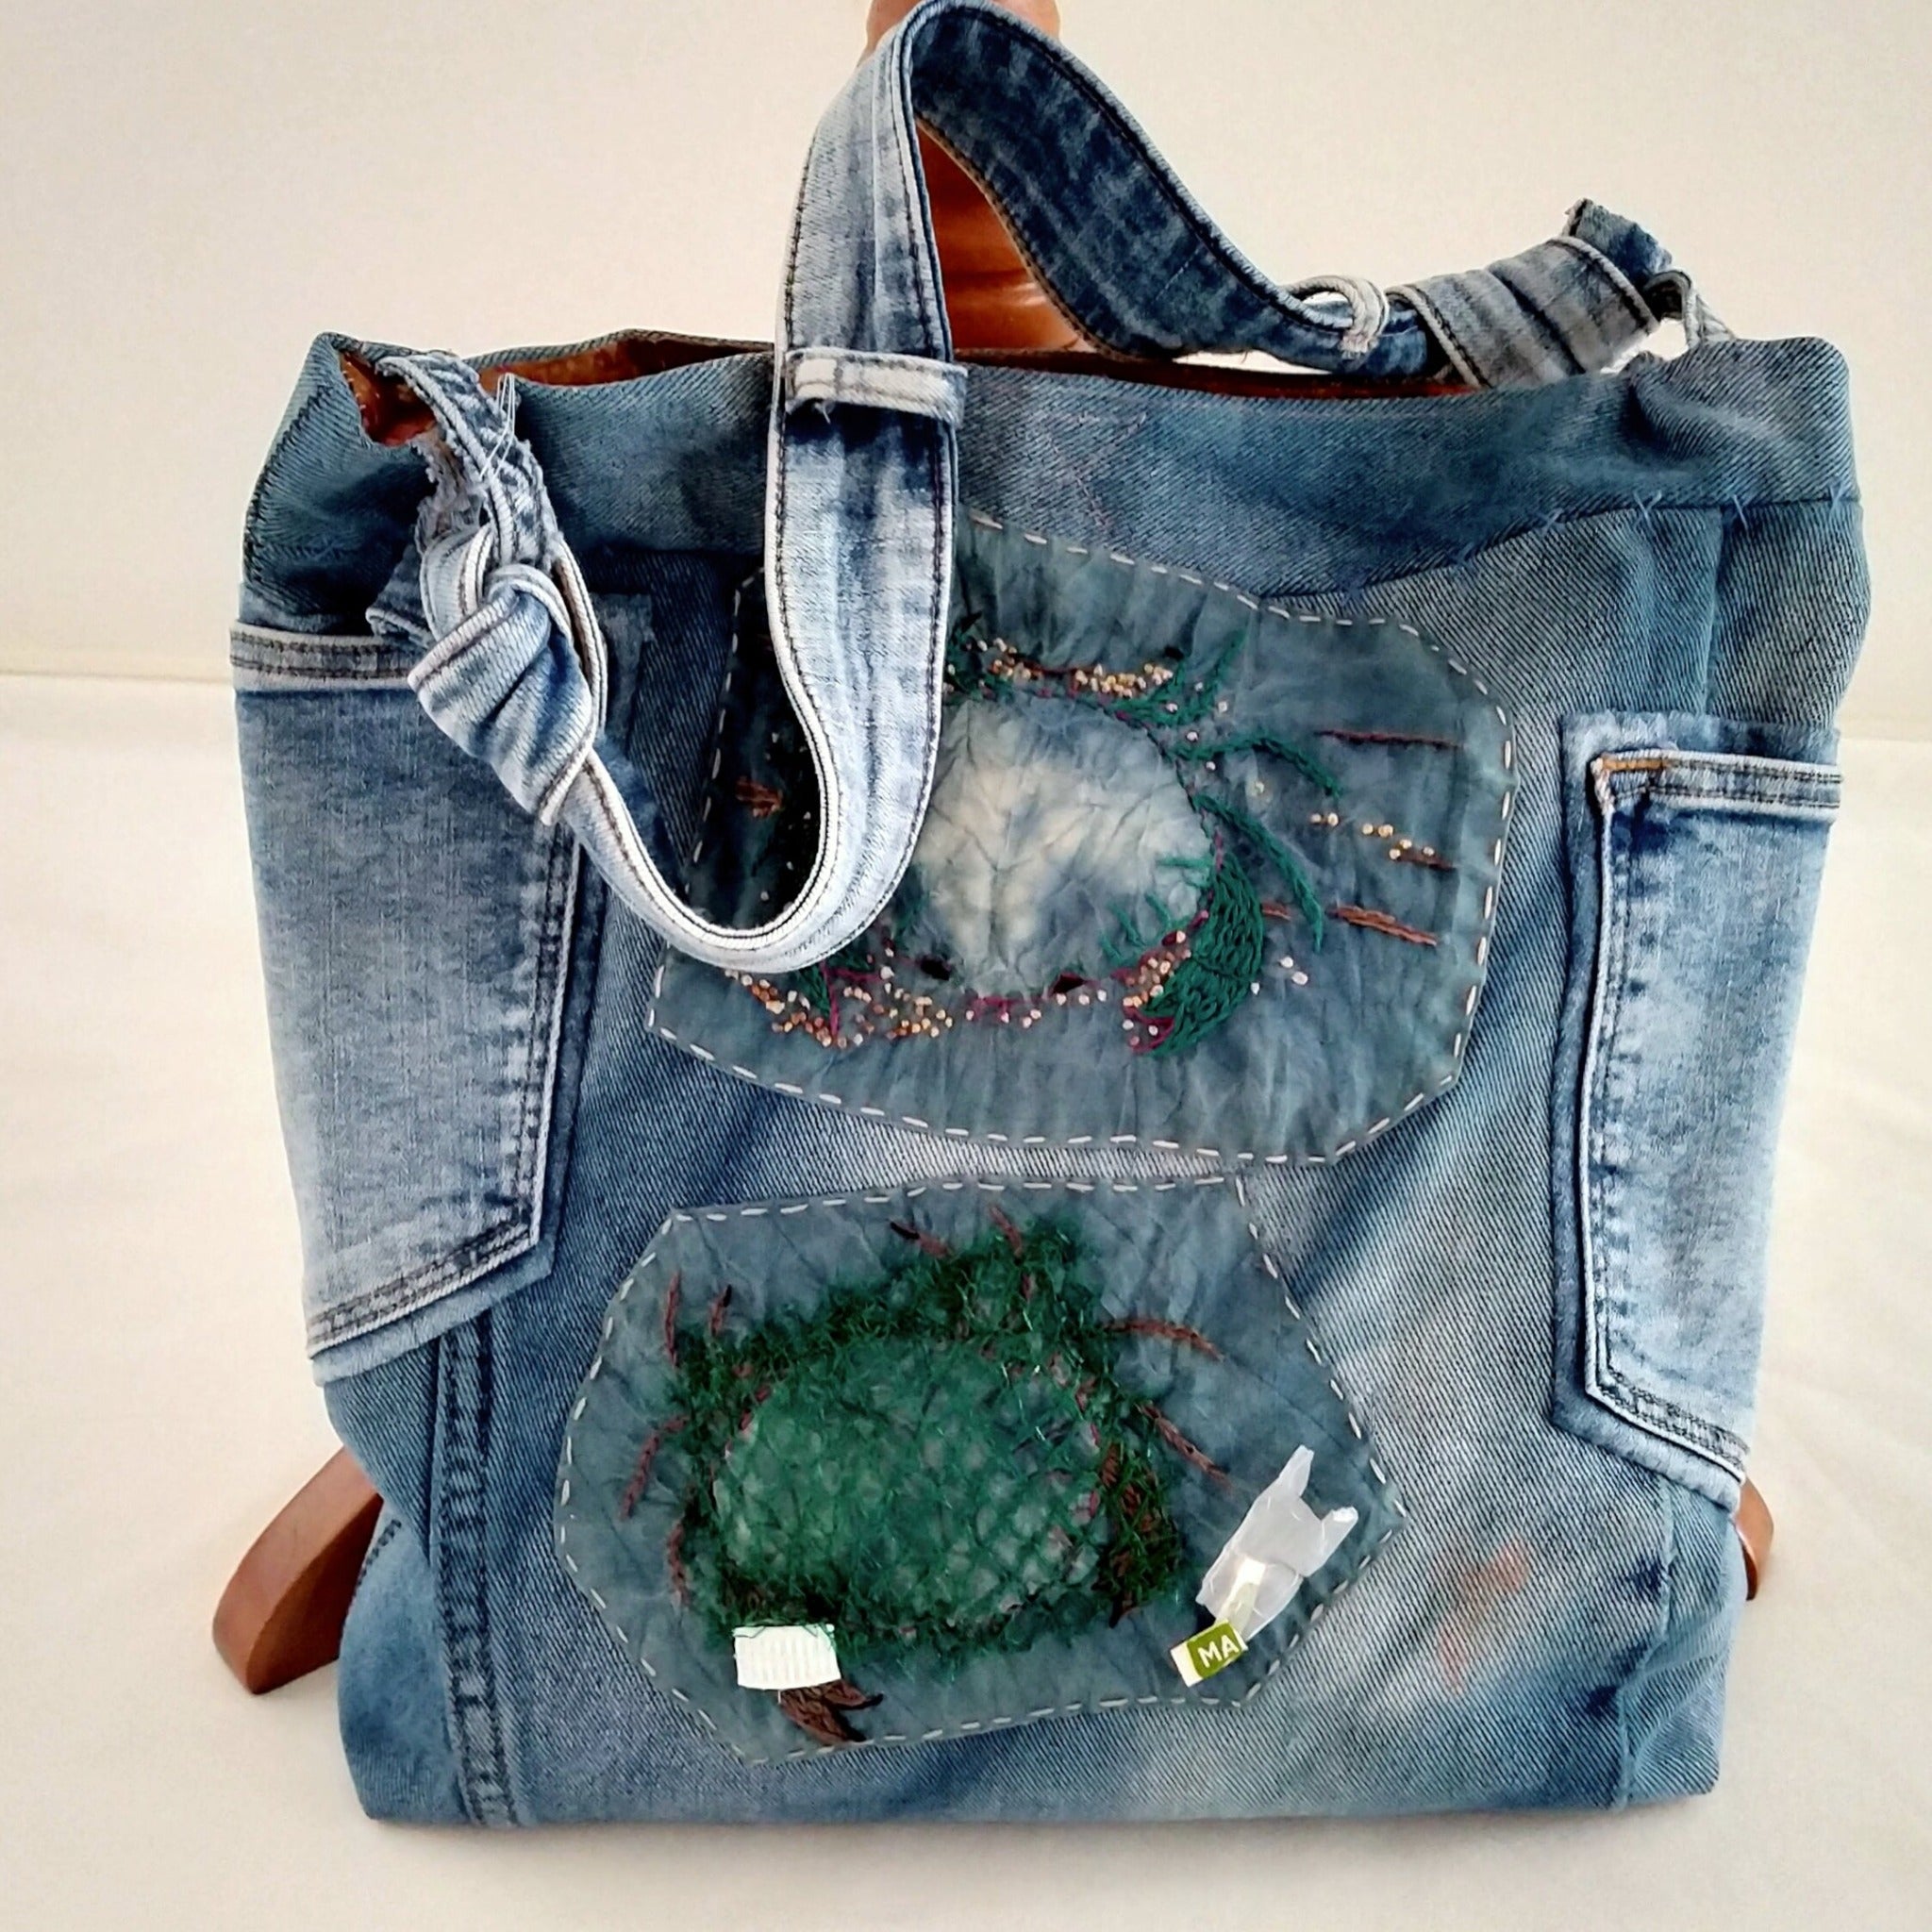 'Slow & Steady' Recycled Jeans Bag handmade by Neelam Singhal